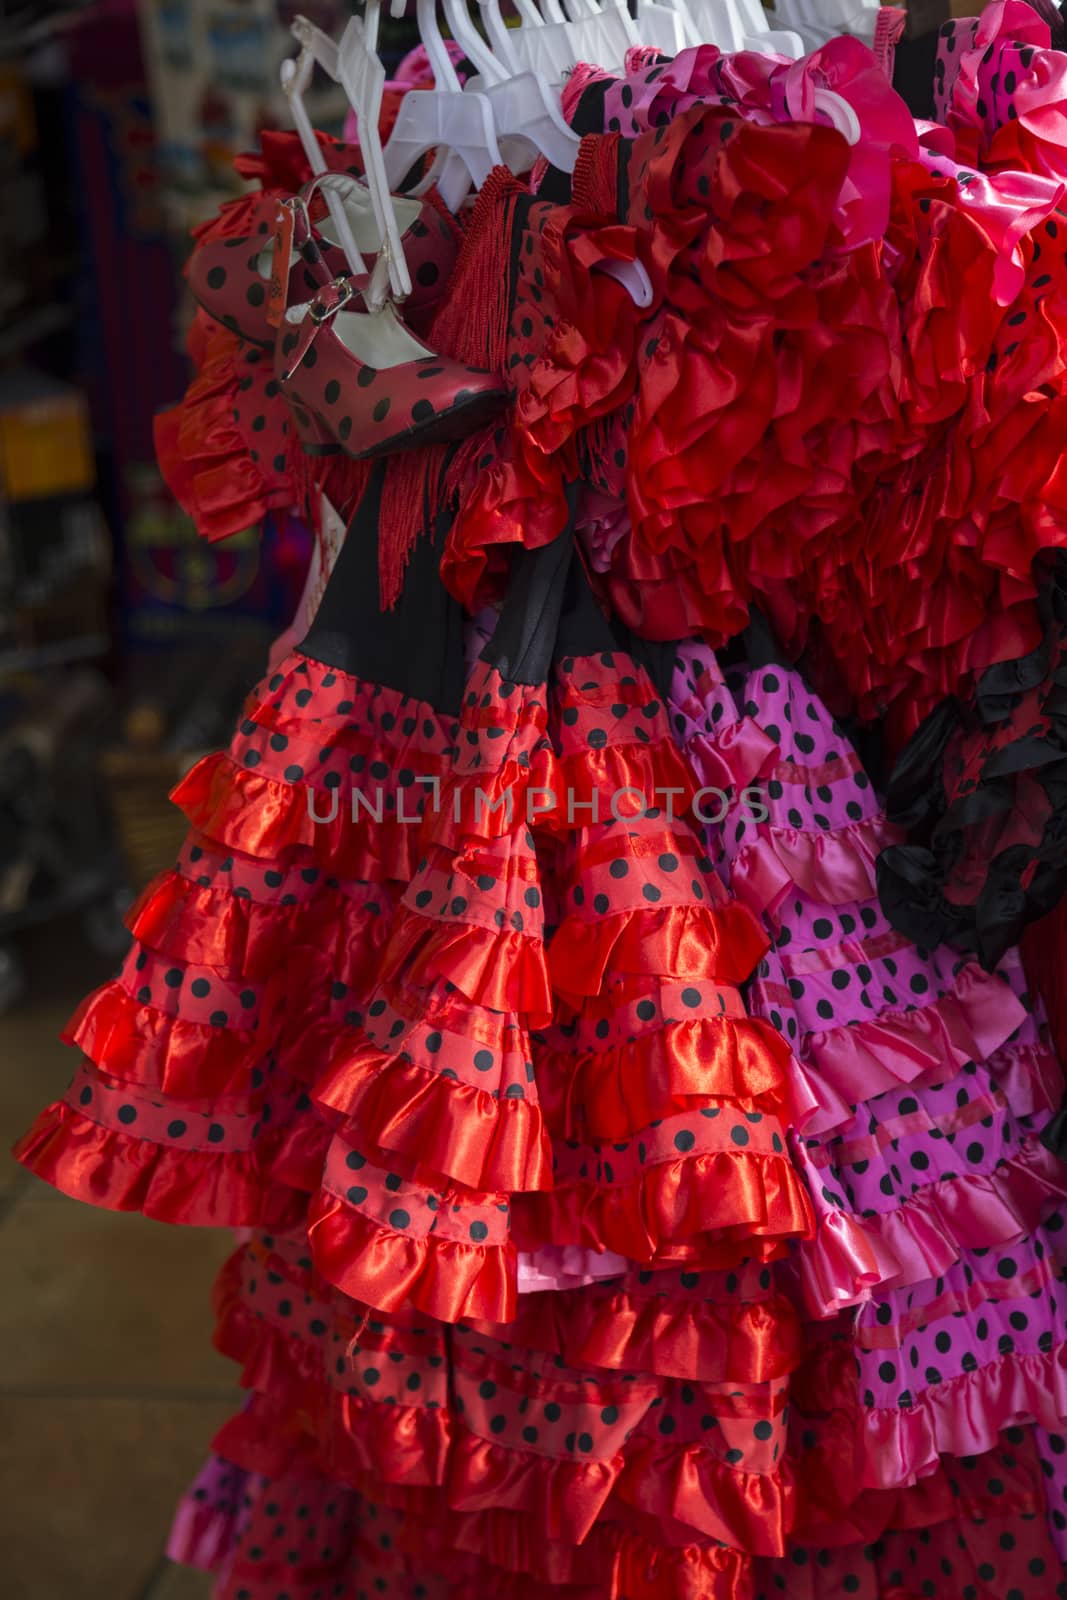 Spanish dresses for sale on a stand by KylieEllway